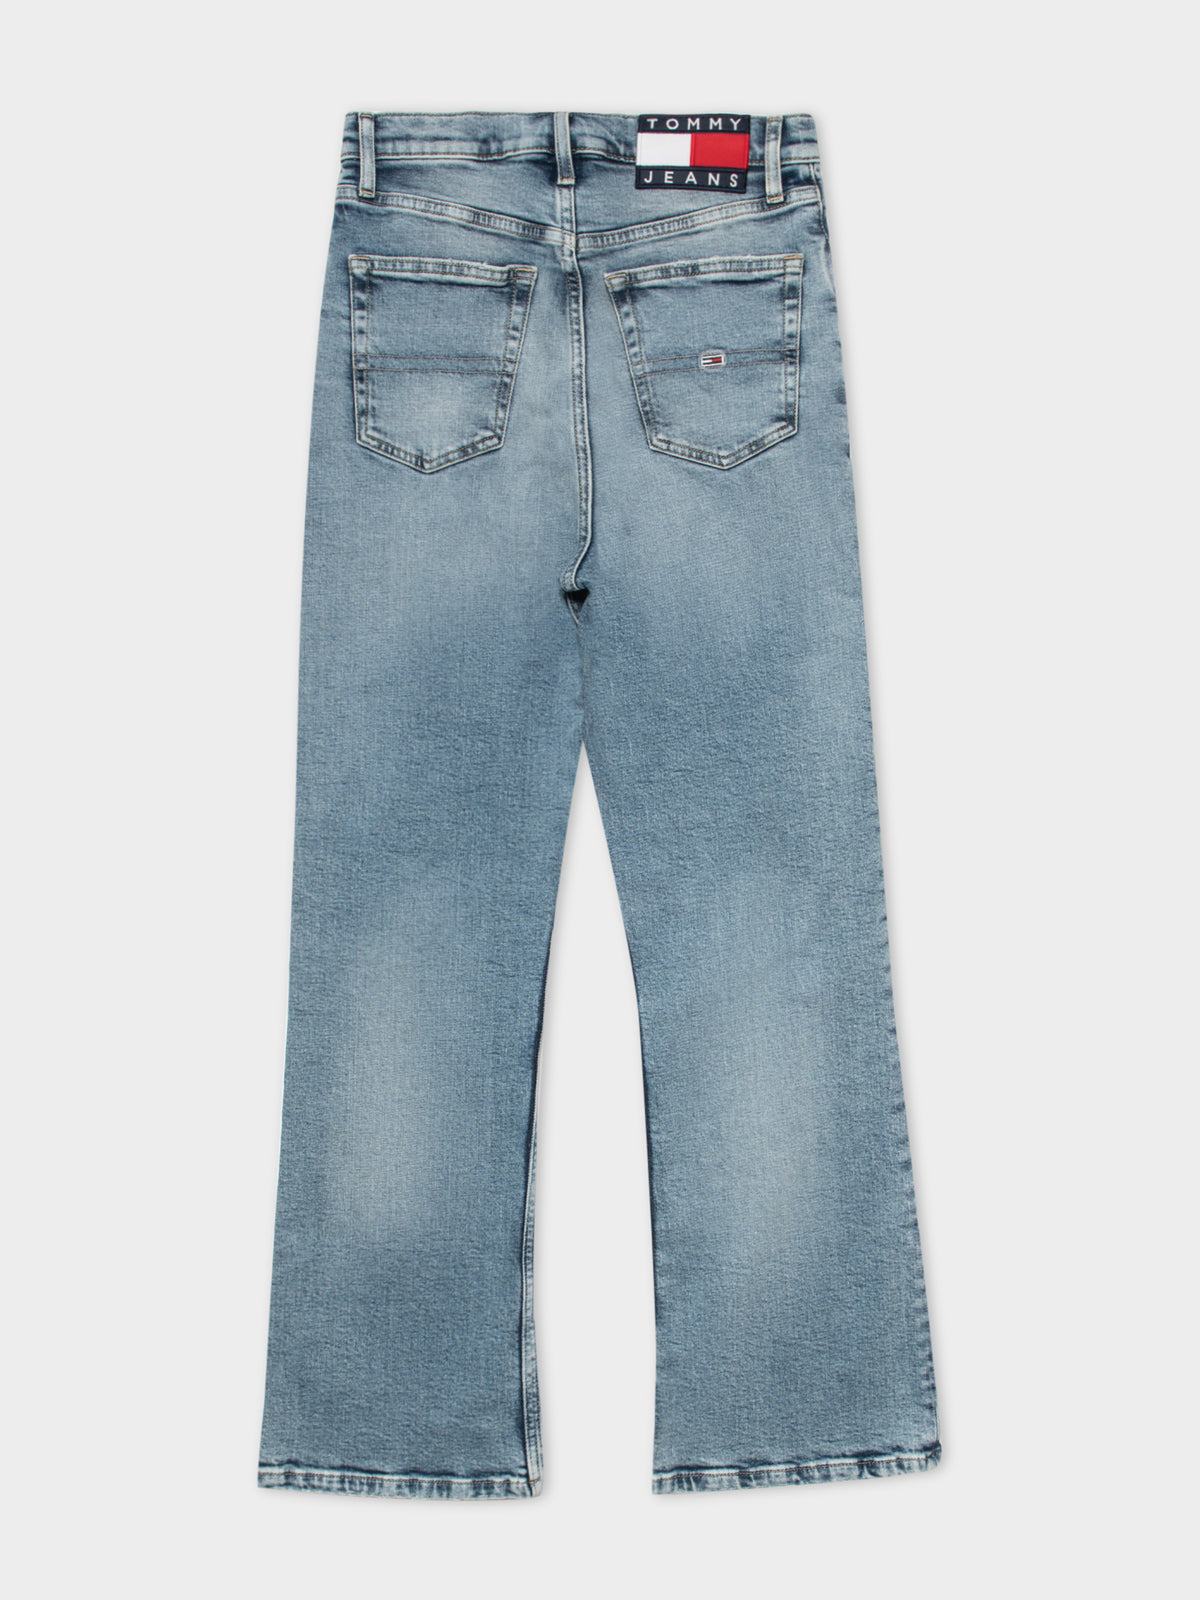 Harper High Rise Flare Ankle BF Jeans in Light Blue